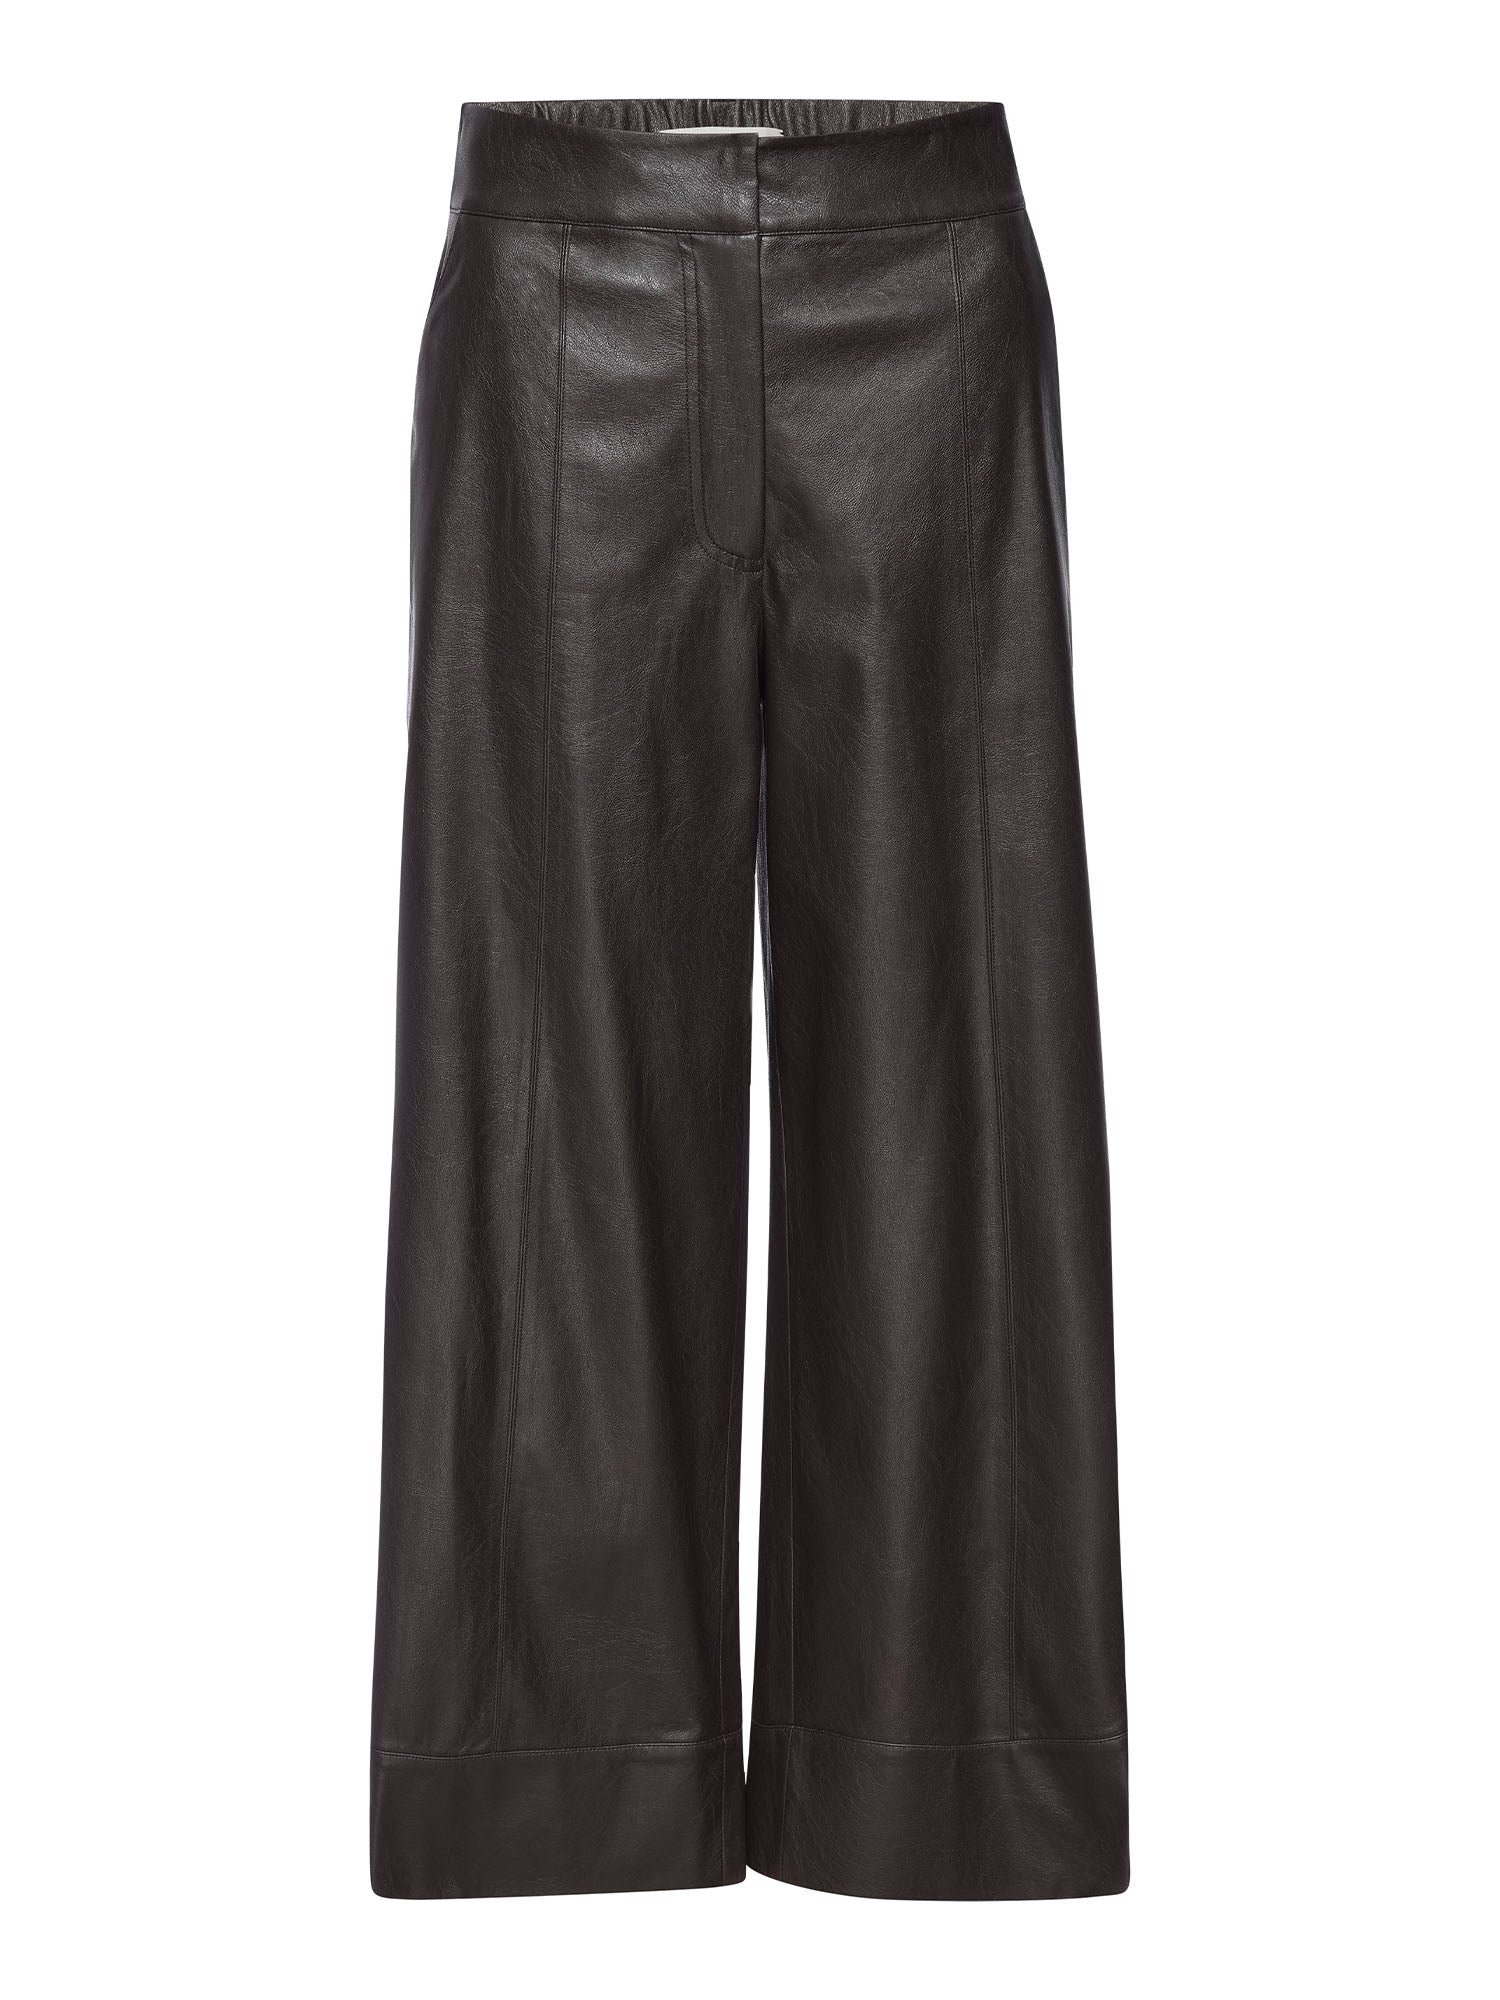 The Odele Cropped Pant